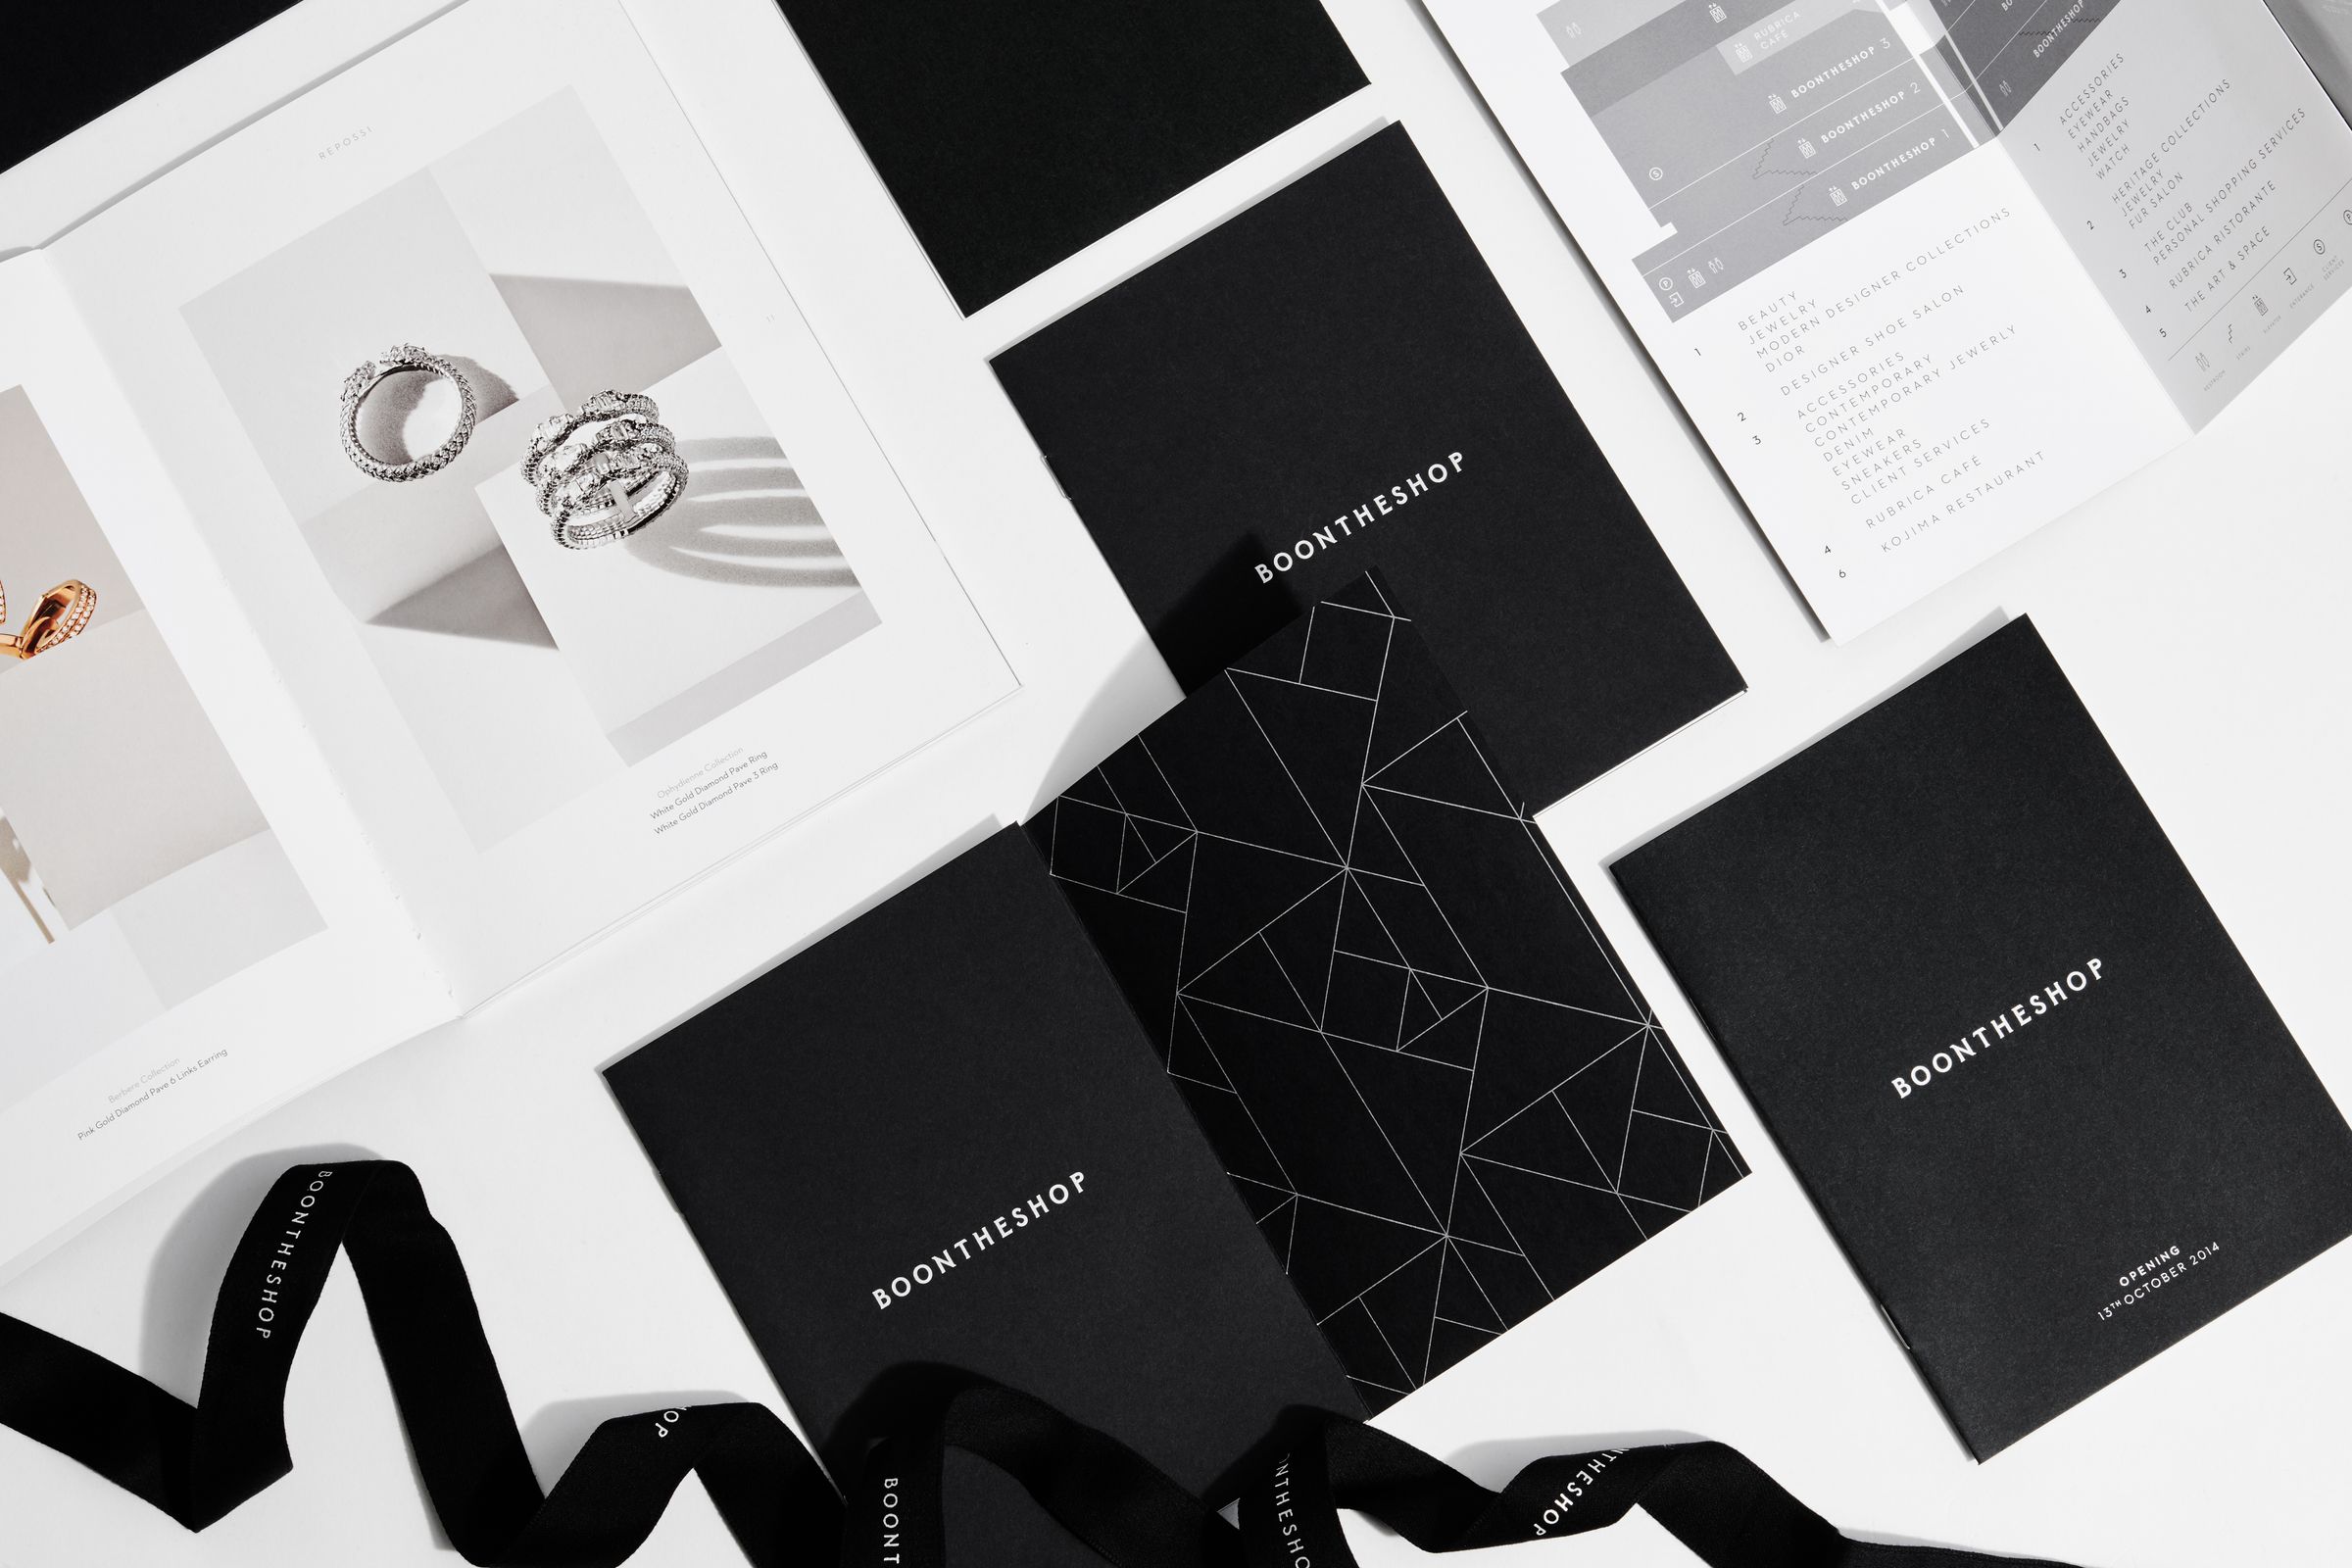 BOONTHESHOP collateral design